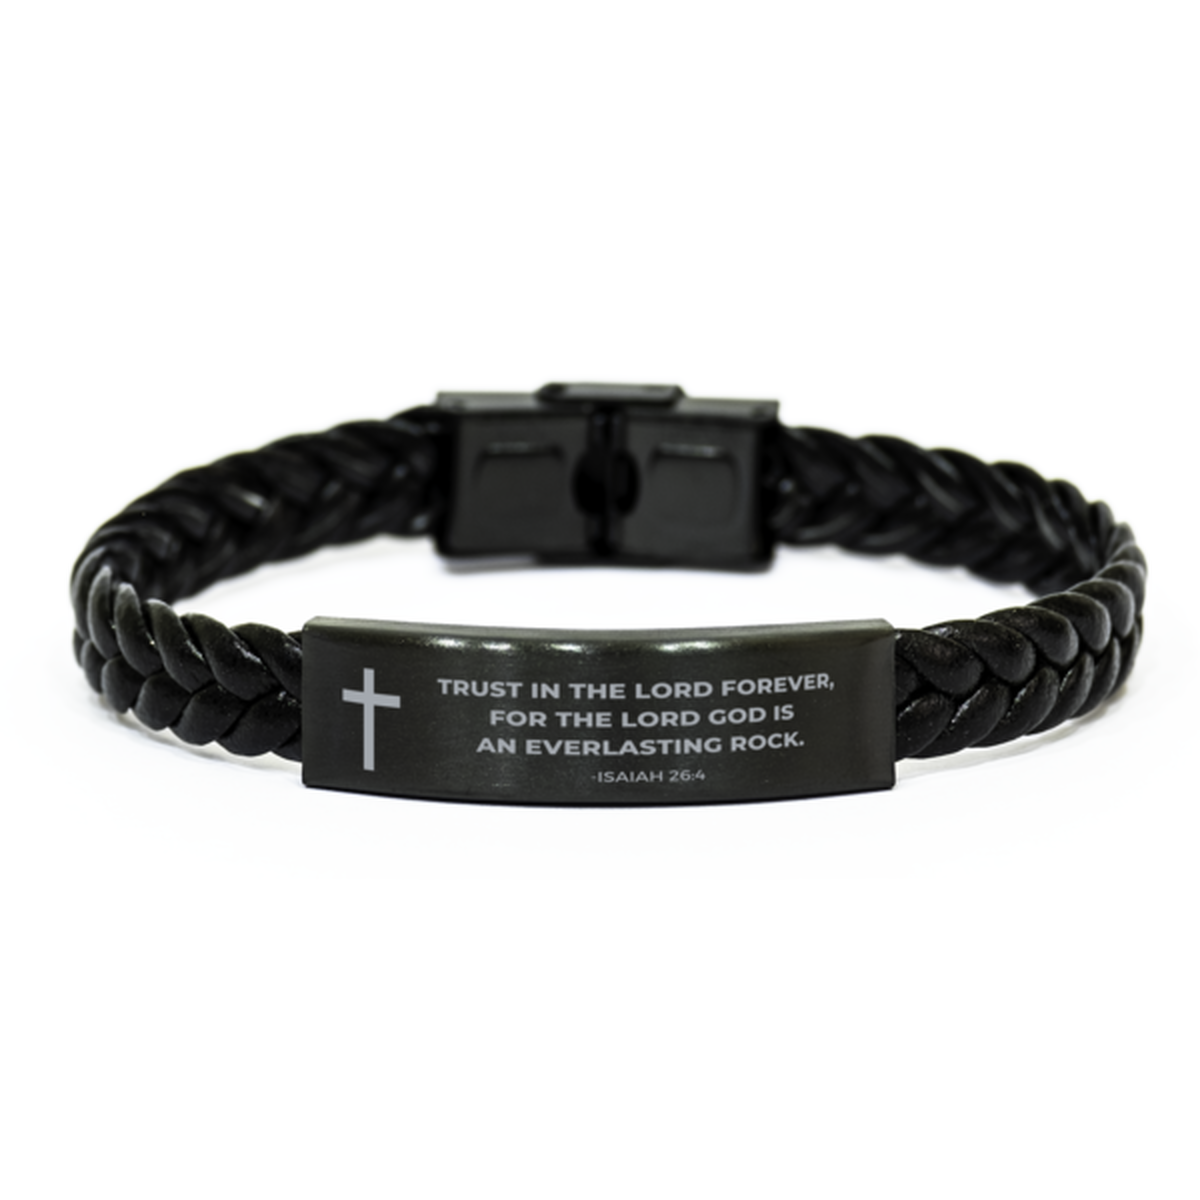 Baptism Gifts For Teenage Boys Girls, Christian Bible Verse Braided Leather Bracelet, Trust in the Lord forever, Catholic Confirmation Gifts for Son, Godson, Grandson, Nephew